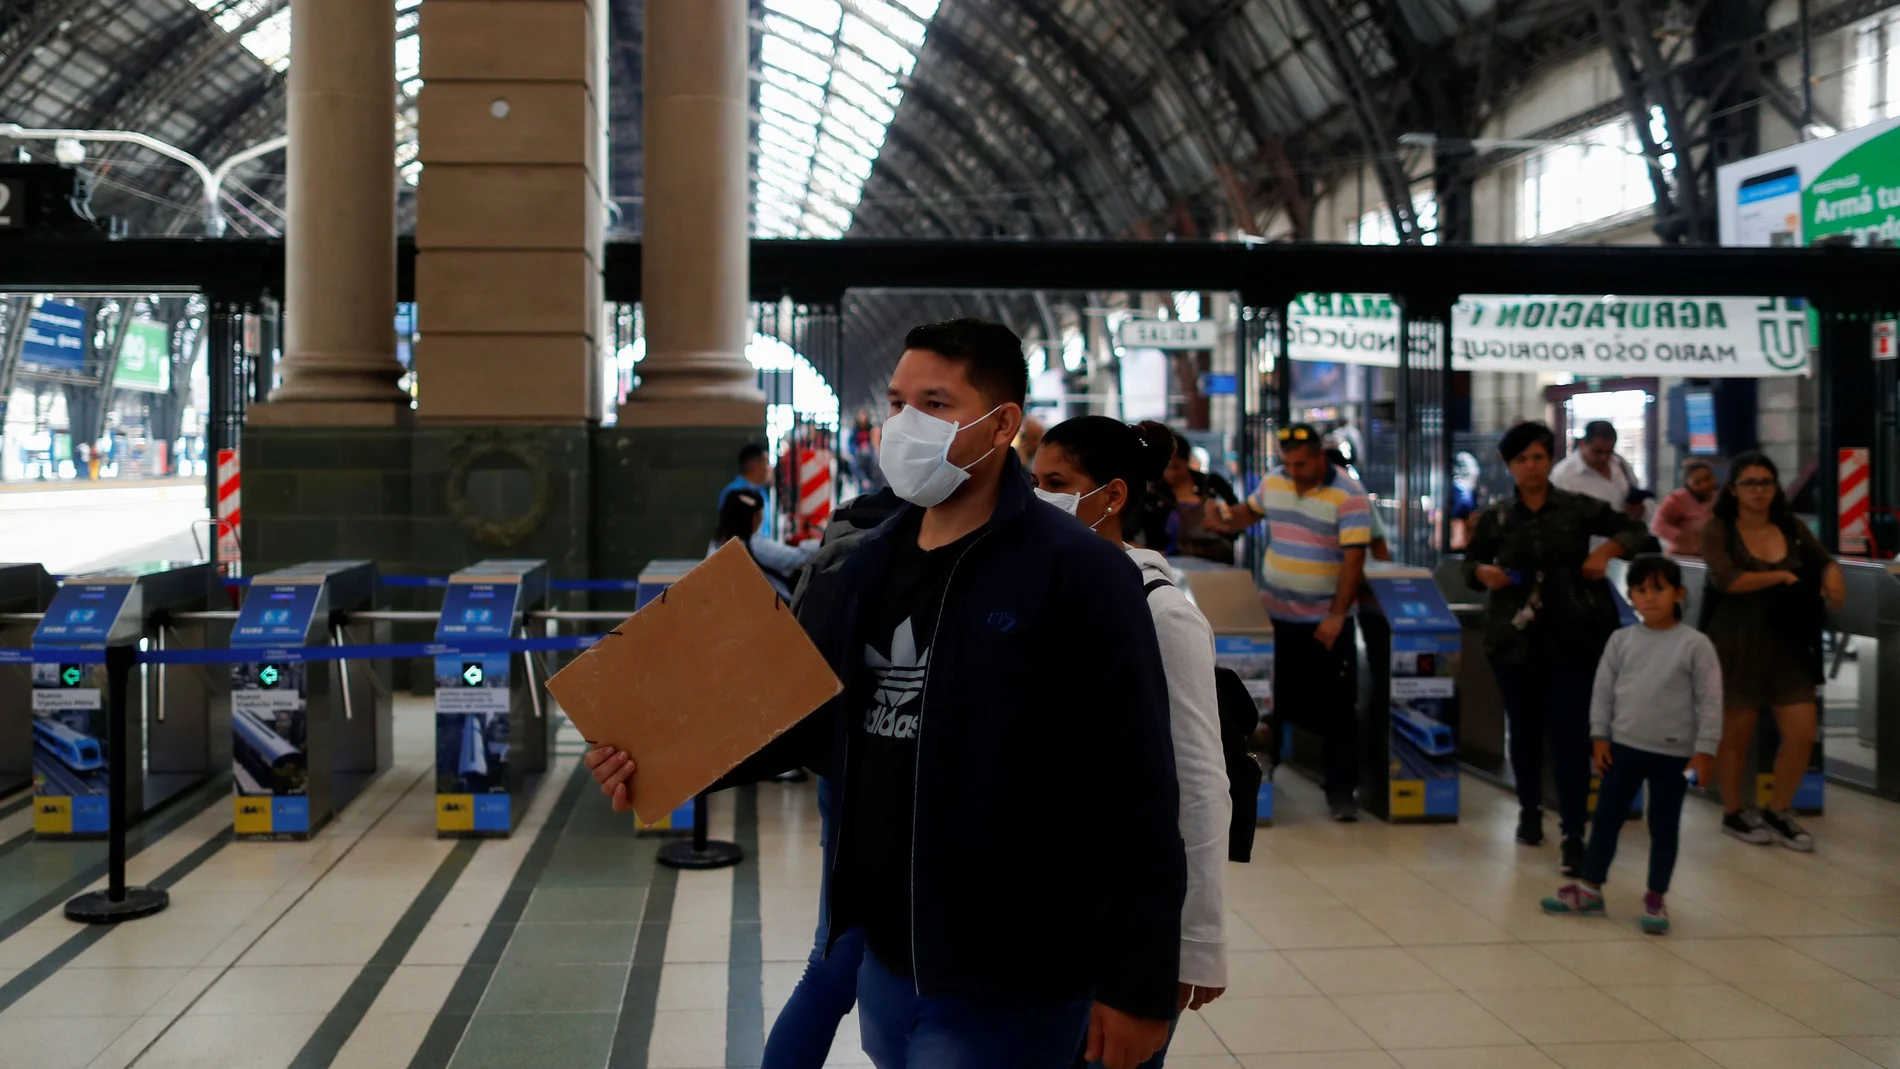 A man wearing a face mask as a preventive measure against the coronavirus outbreak walks at the Retiro train station, in Buenos Aires